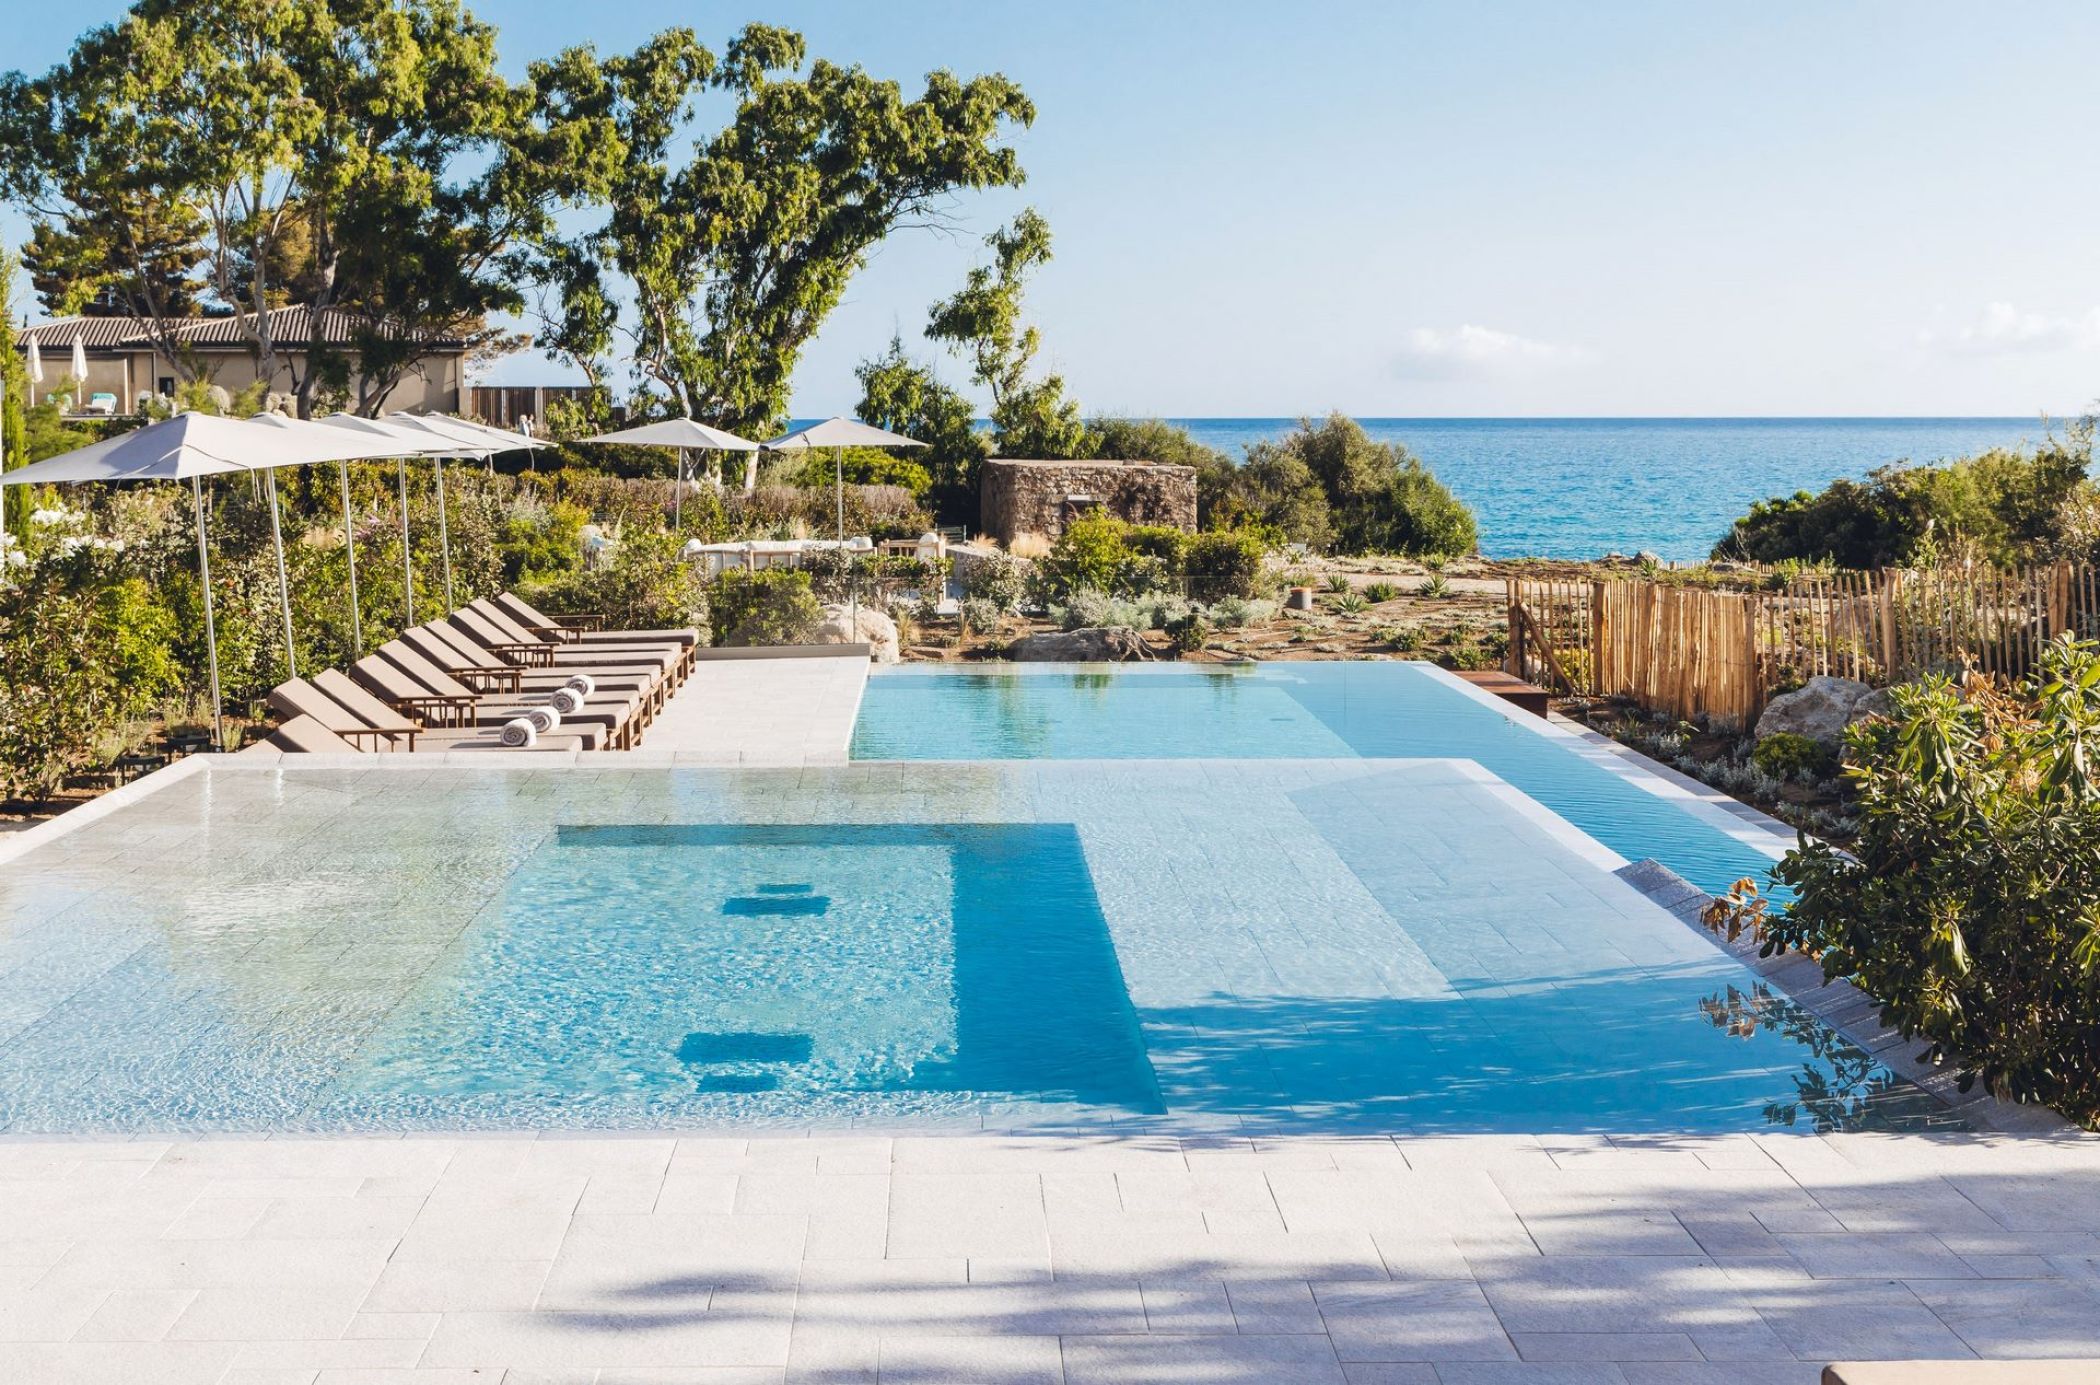 The swimming pool of the 5 star hotel in Corsica at Ile Rousse